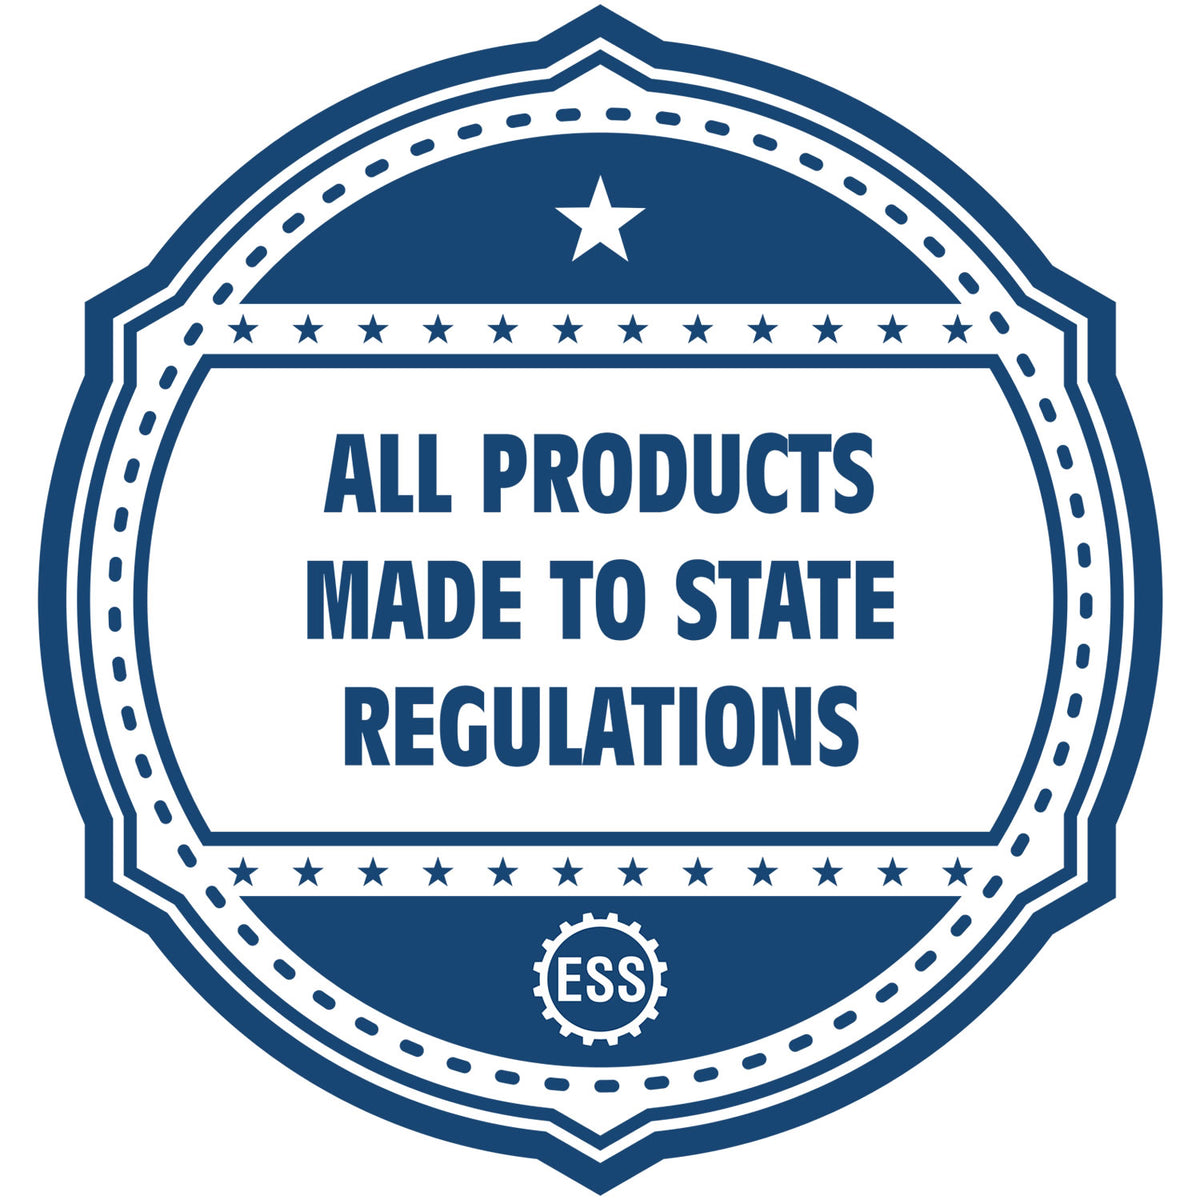 An icon or badge element for the Self-Inking North Dakota Landscape Architect Stamp showing that this product is made in compliance with state regulations.